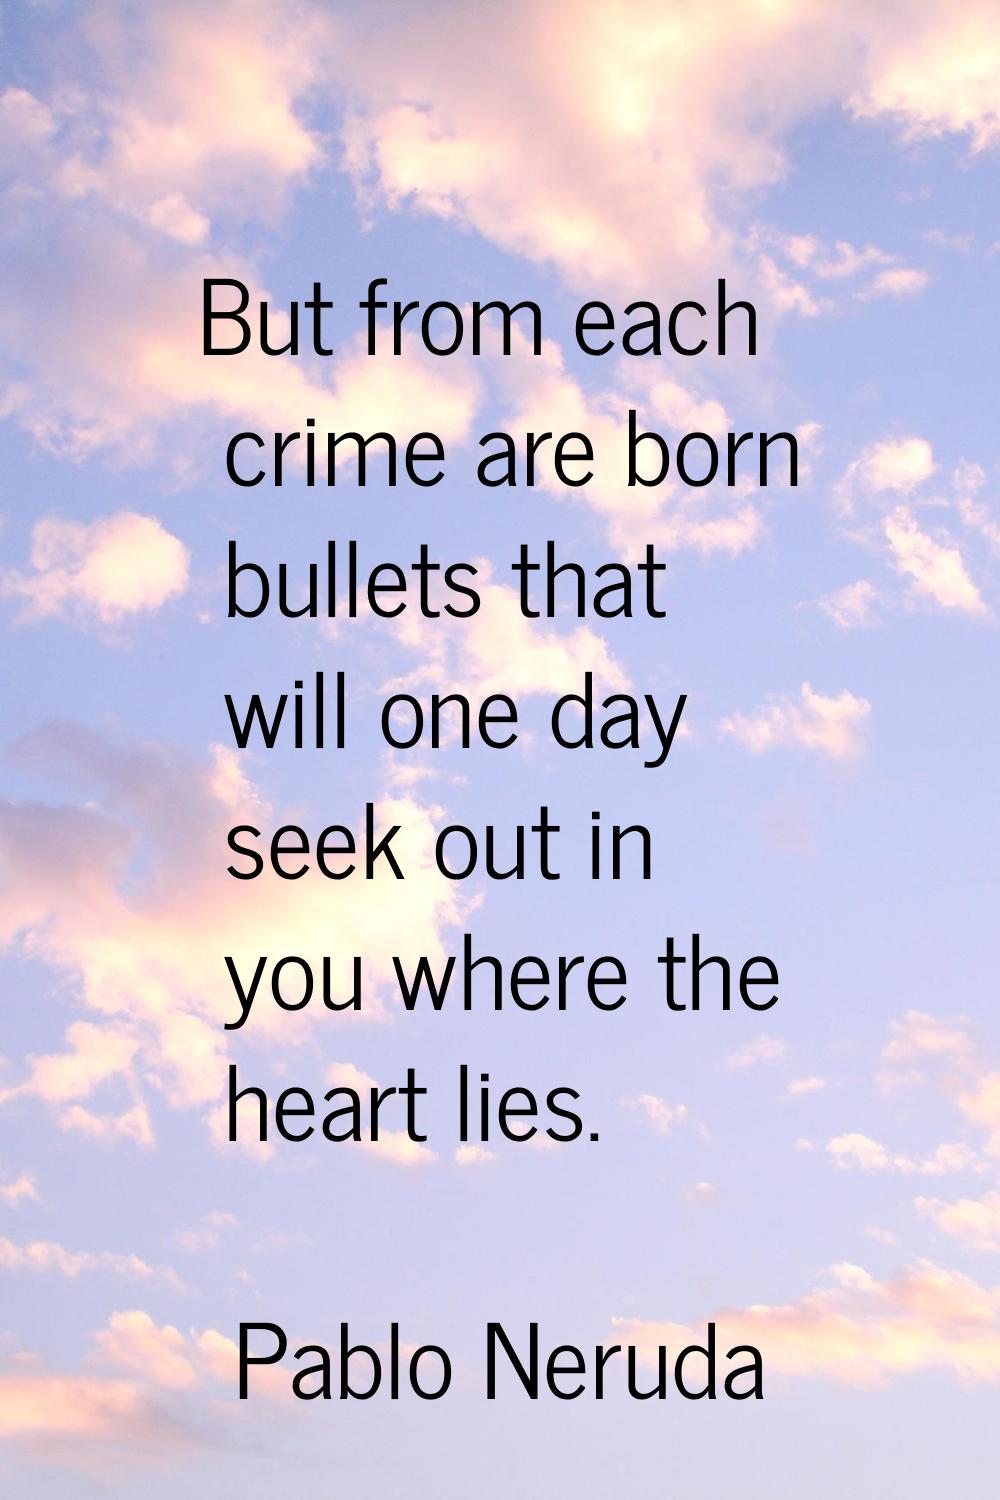 But from each crime are born bullets that will one day seek out in you where the heart lies.